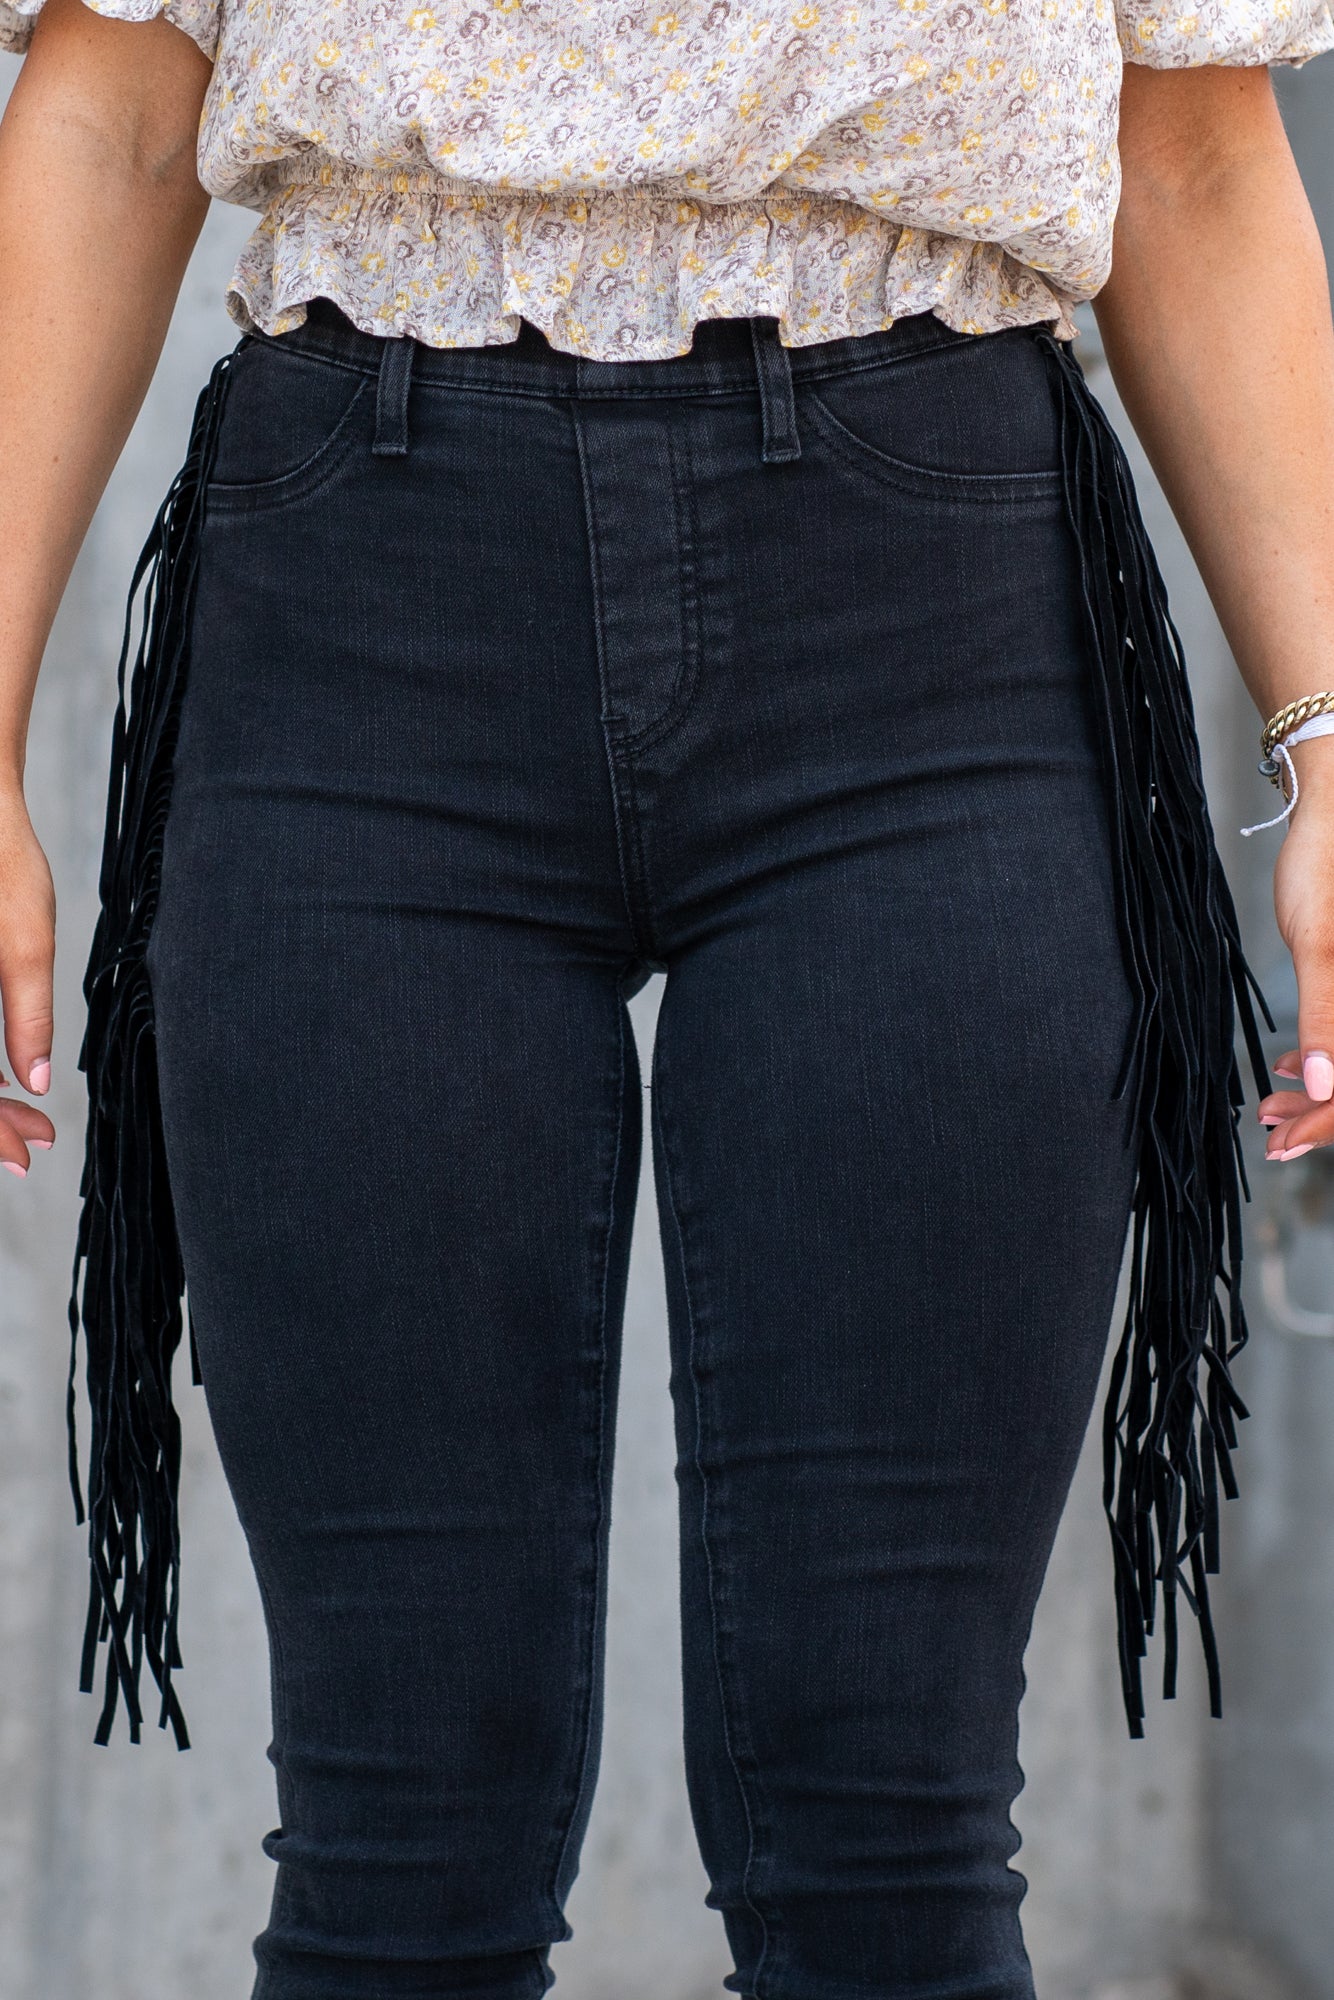 Judy Blue  These pull-on jeggings have a fringe side detail and stretchy band waist. Carefully designed by Judy Blue to pull on and go. With a dark wash in black, these will be your new night-out jeans. Color: Black Cut: Pull-On Skinny, 28" Inseam* Rise: High-Rise, 10.75" Front Rise* Material: 52% Cotton, 22% Rayon, 23% Polyester, 3% Lycra Stitching: Classic  Fly: Pull-On  Style #: JB88497 | 88497 Contact us for any additional measurements or sizing.